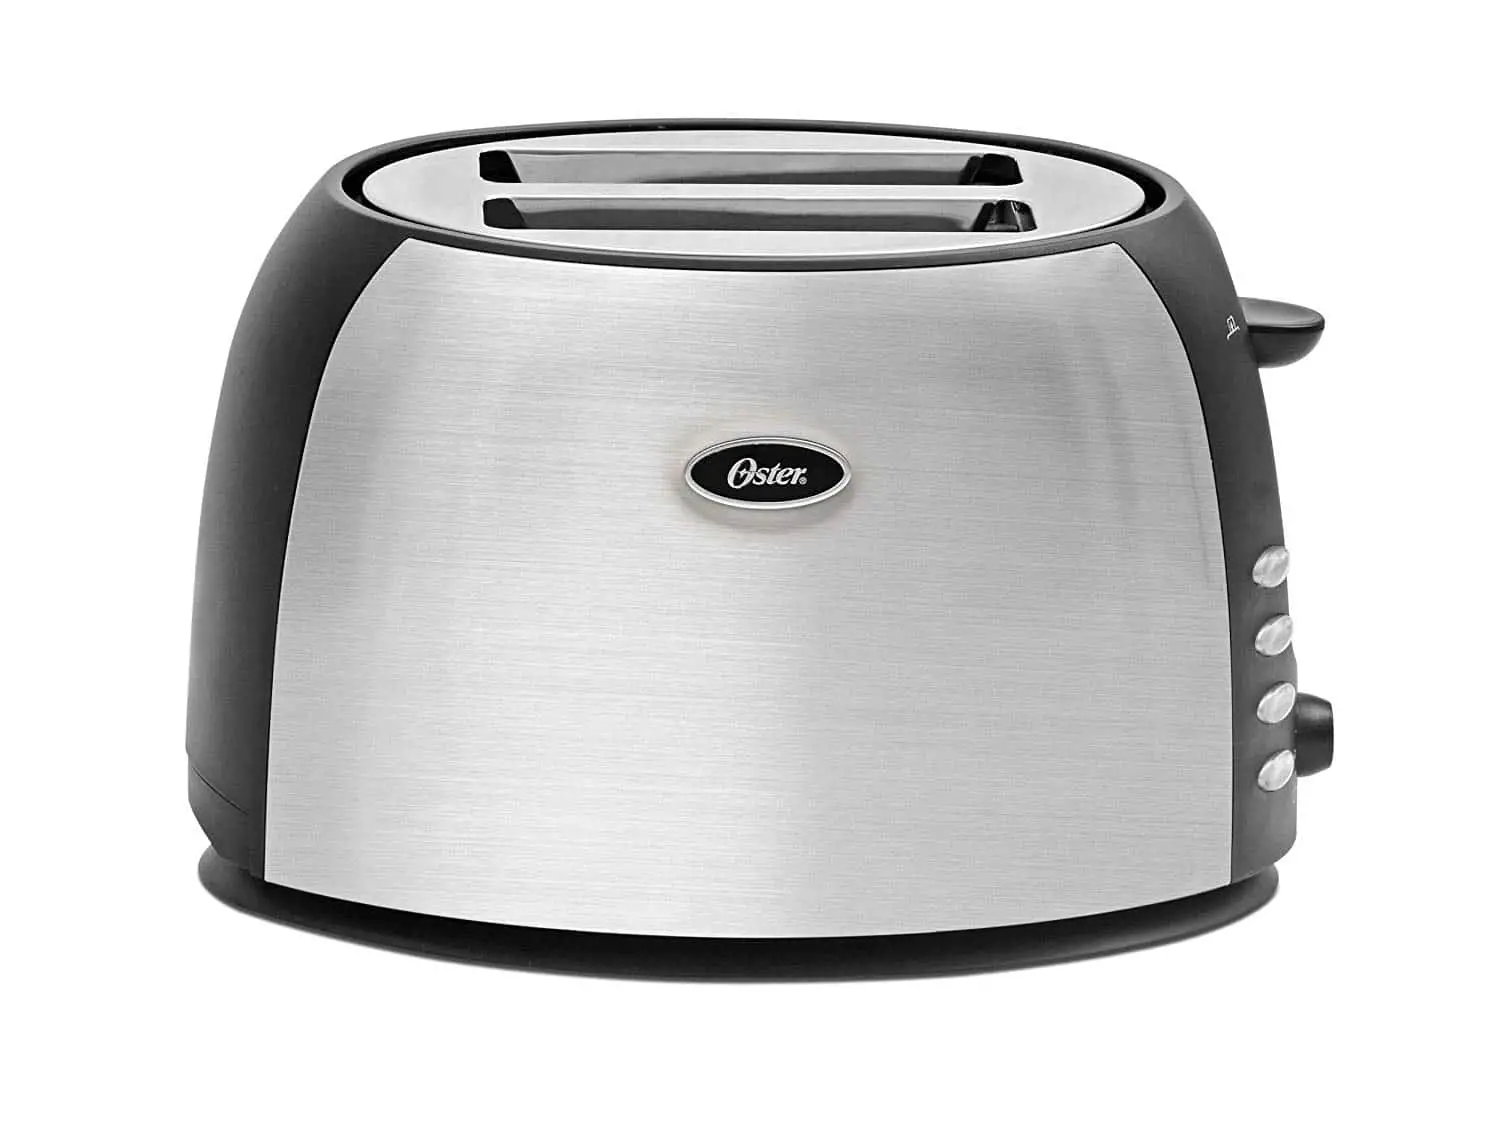 Oster 2-Slice Toaster, Brushed Stainless Steel 